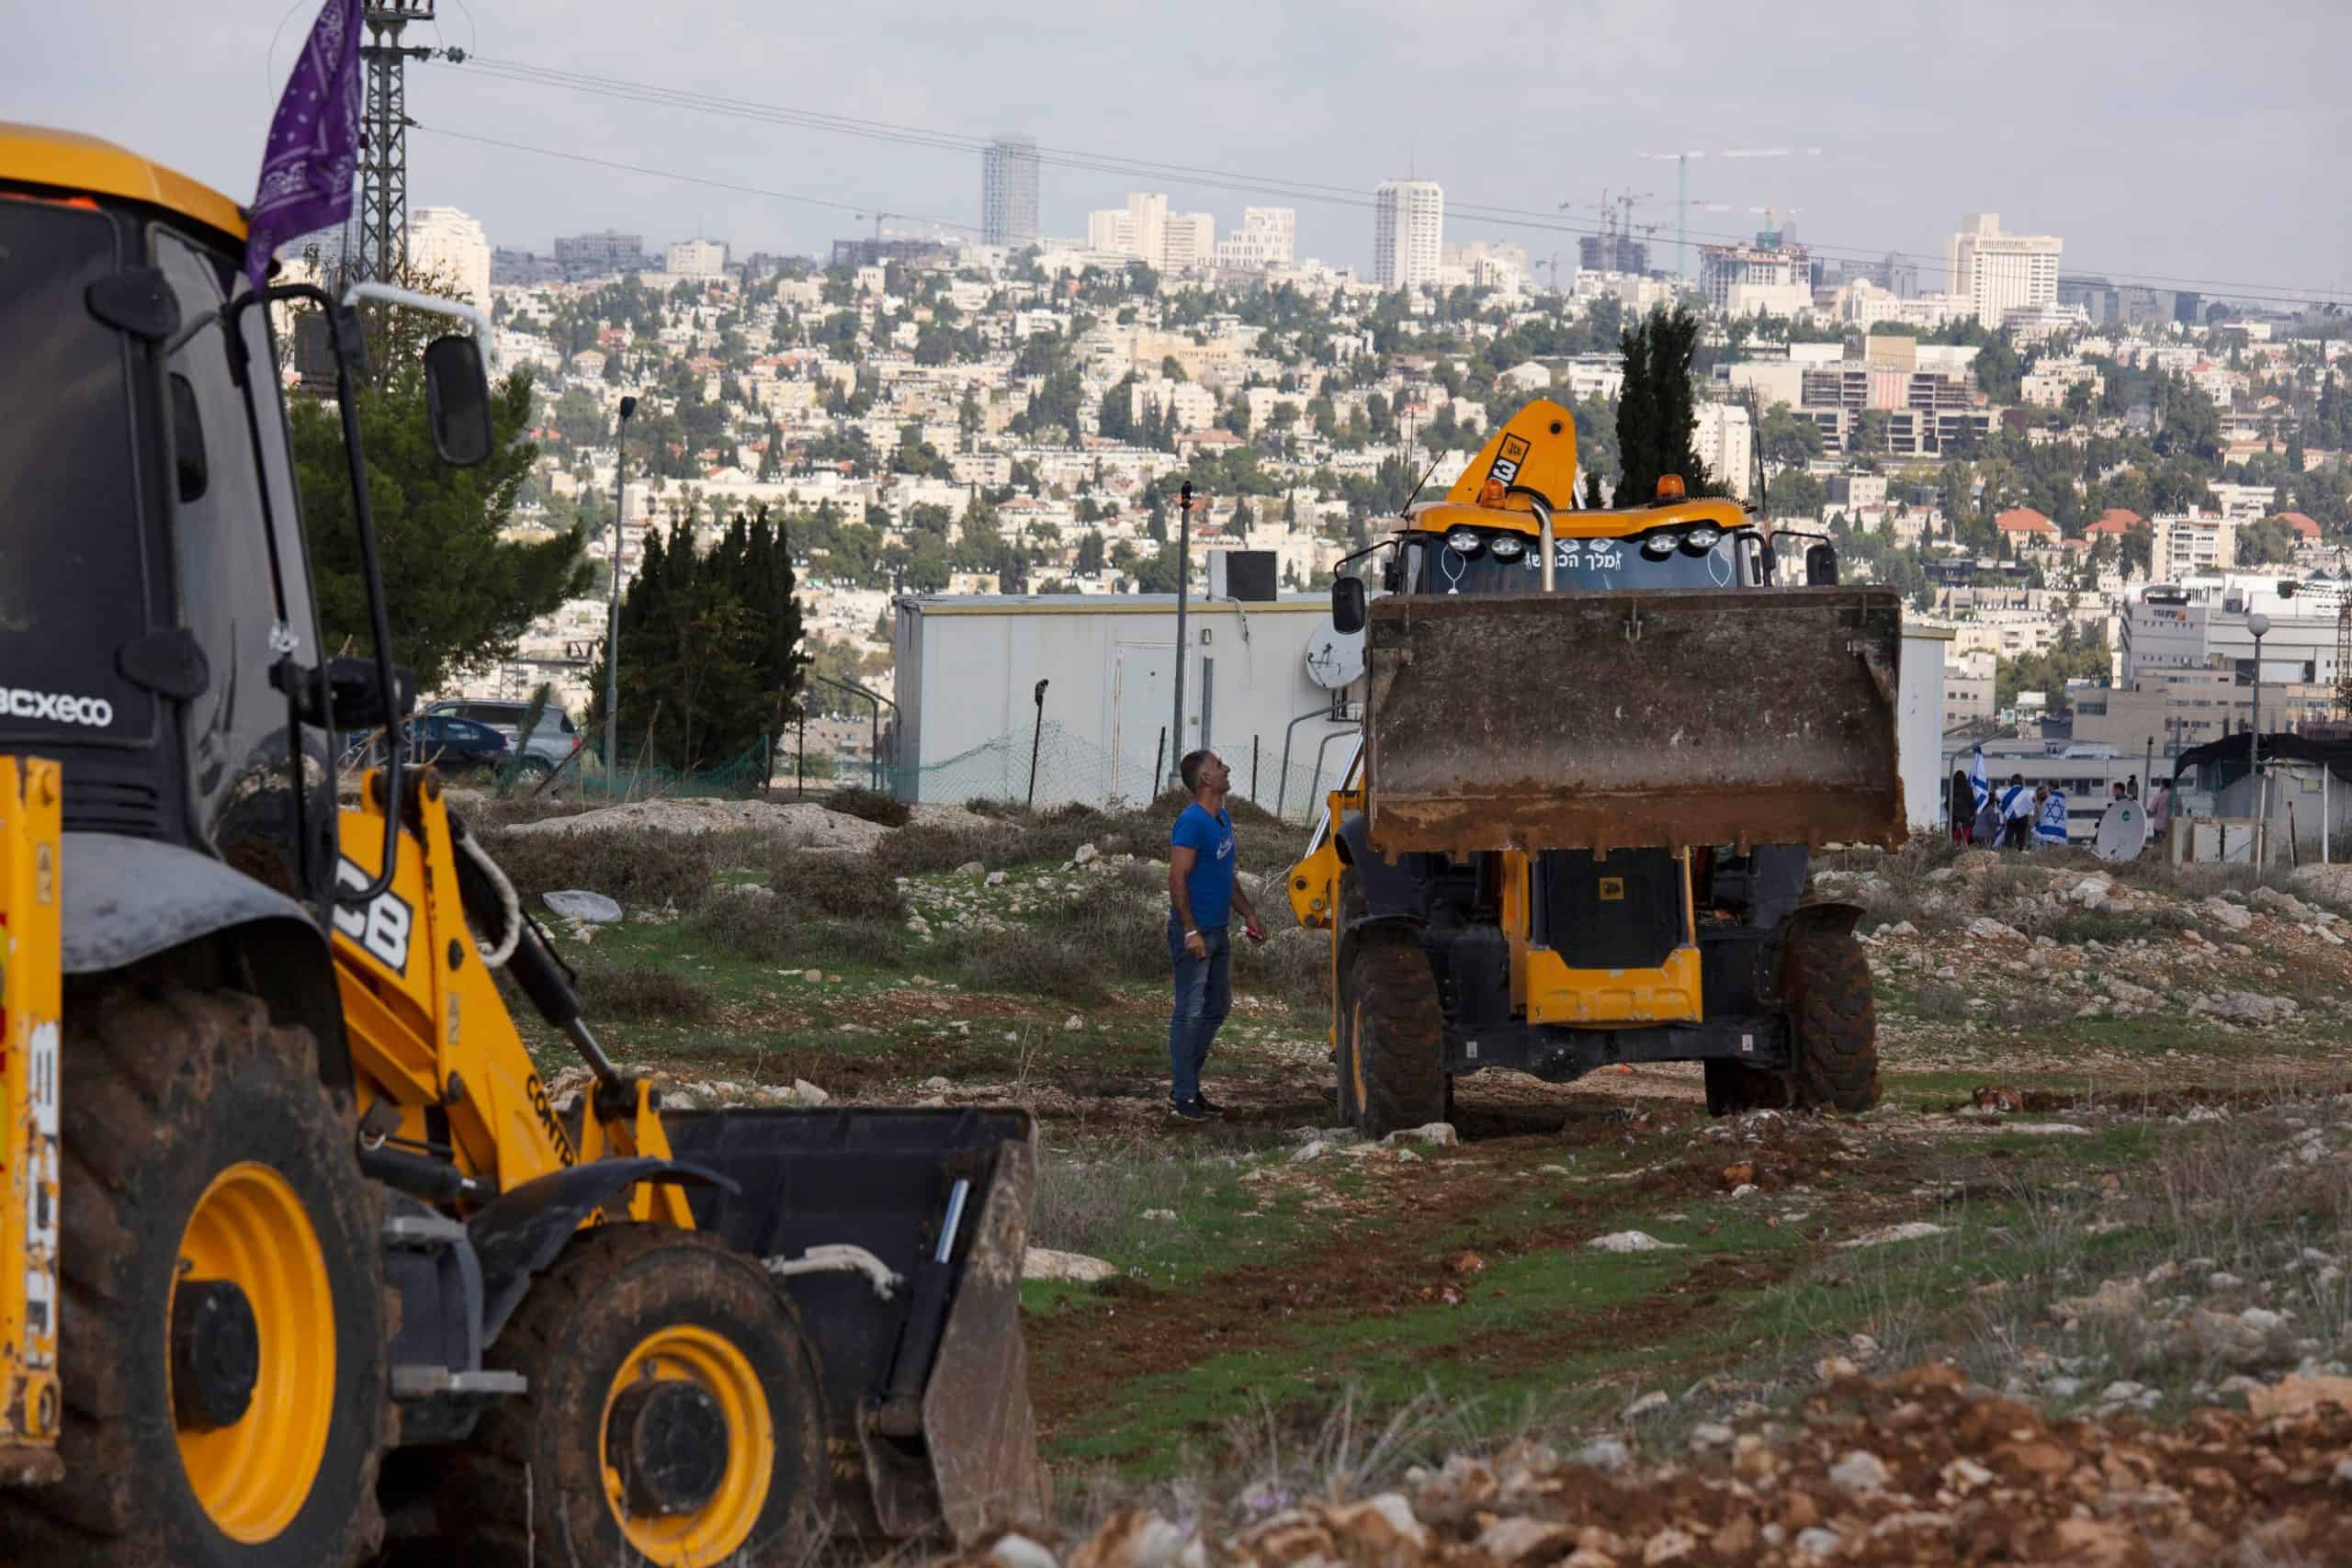 America ‘concerned’ as Israel set to go ahead with 3,000 West Bank settler homes